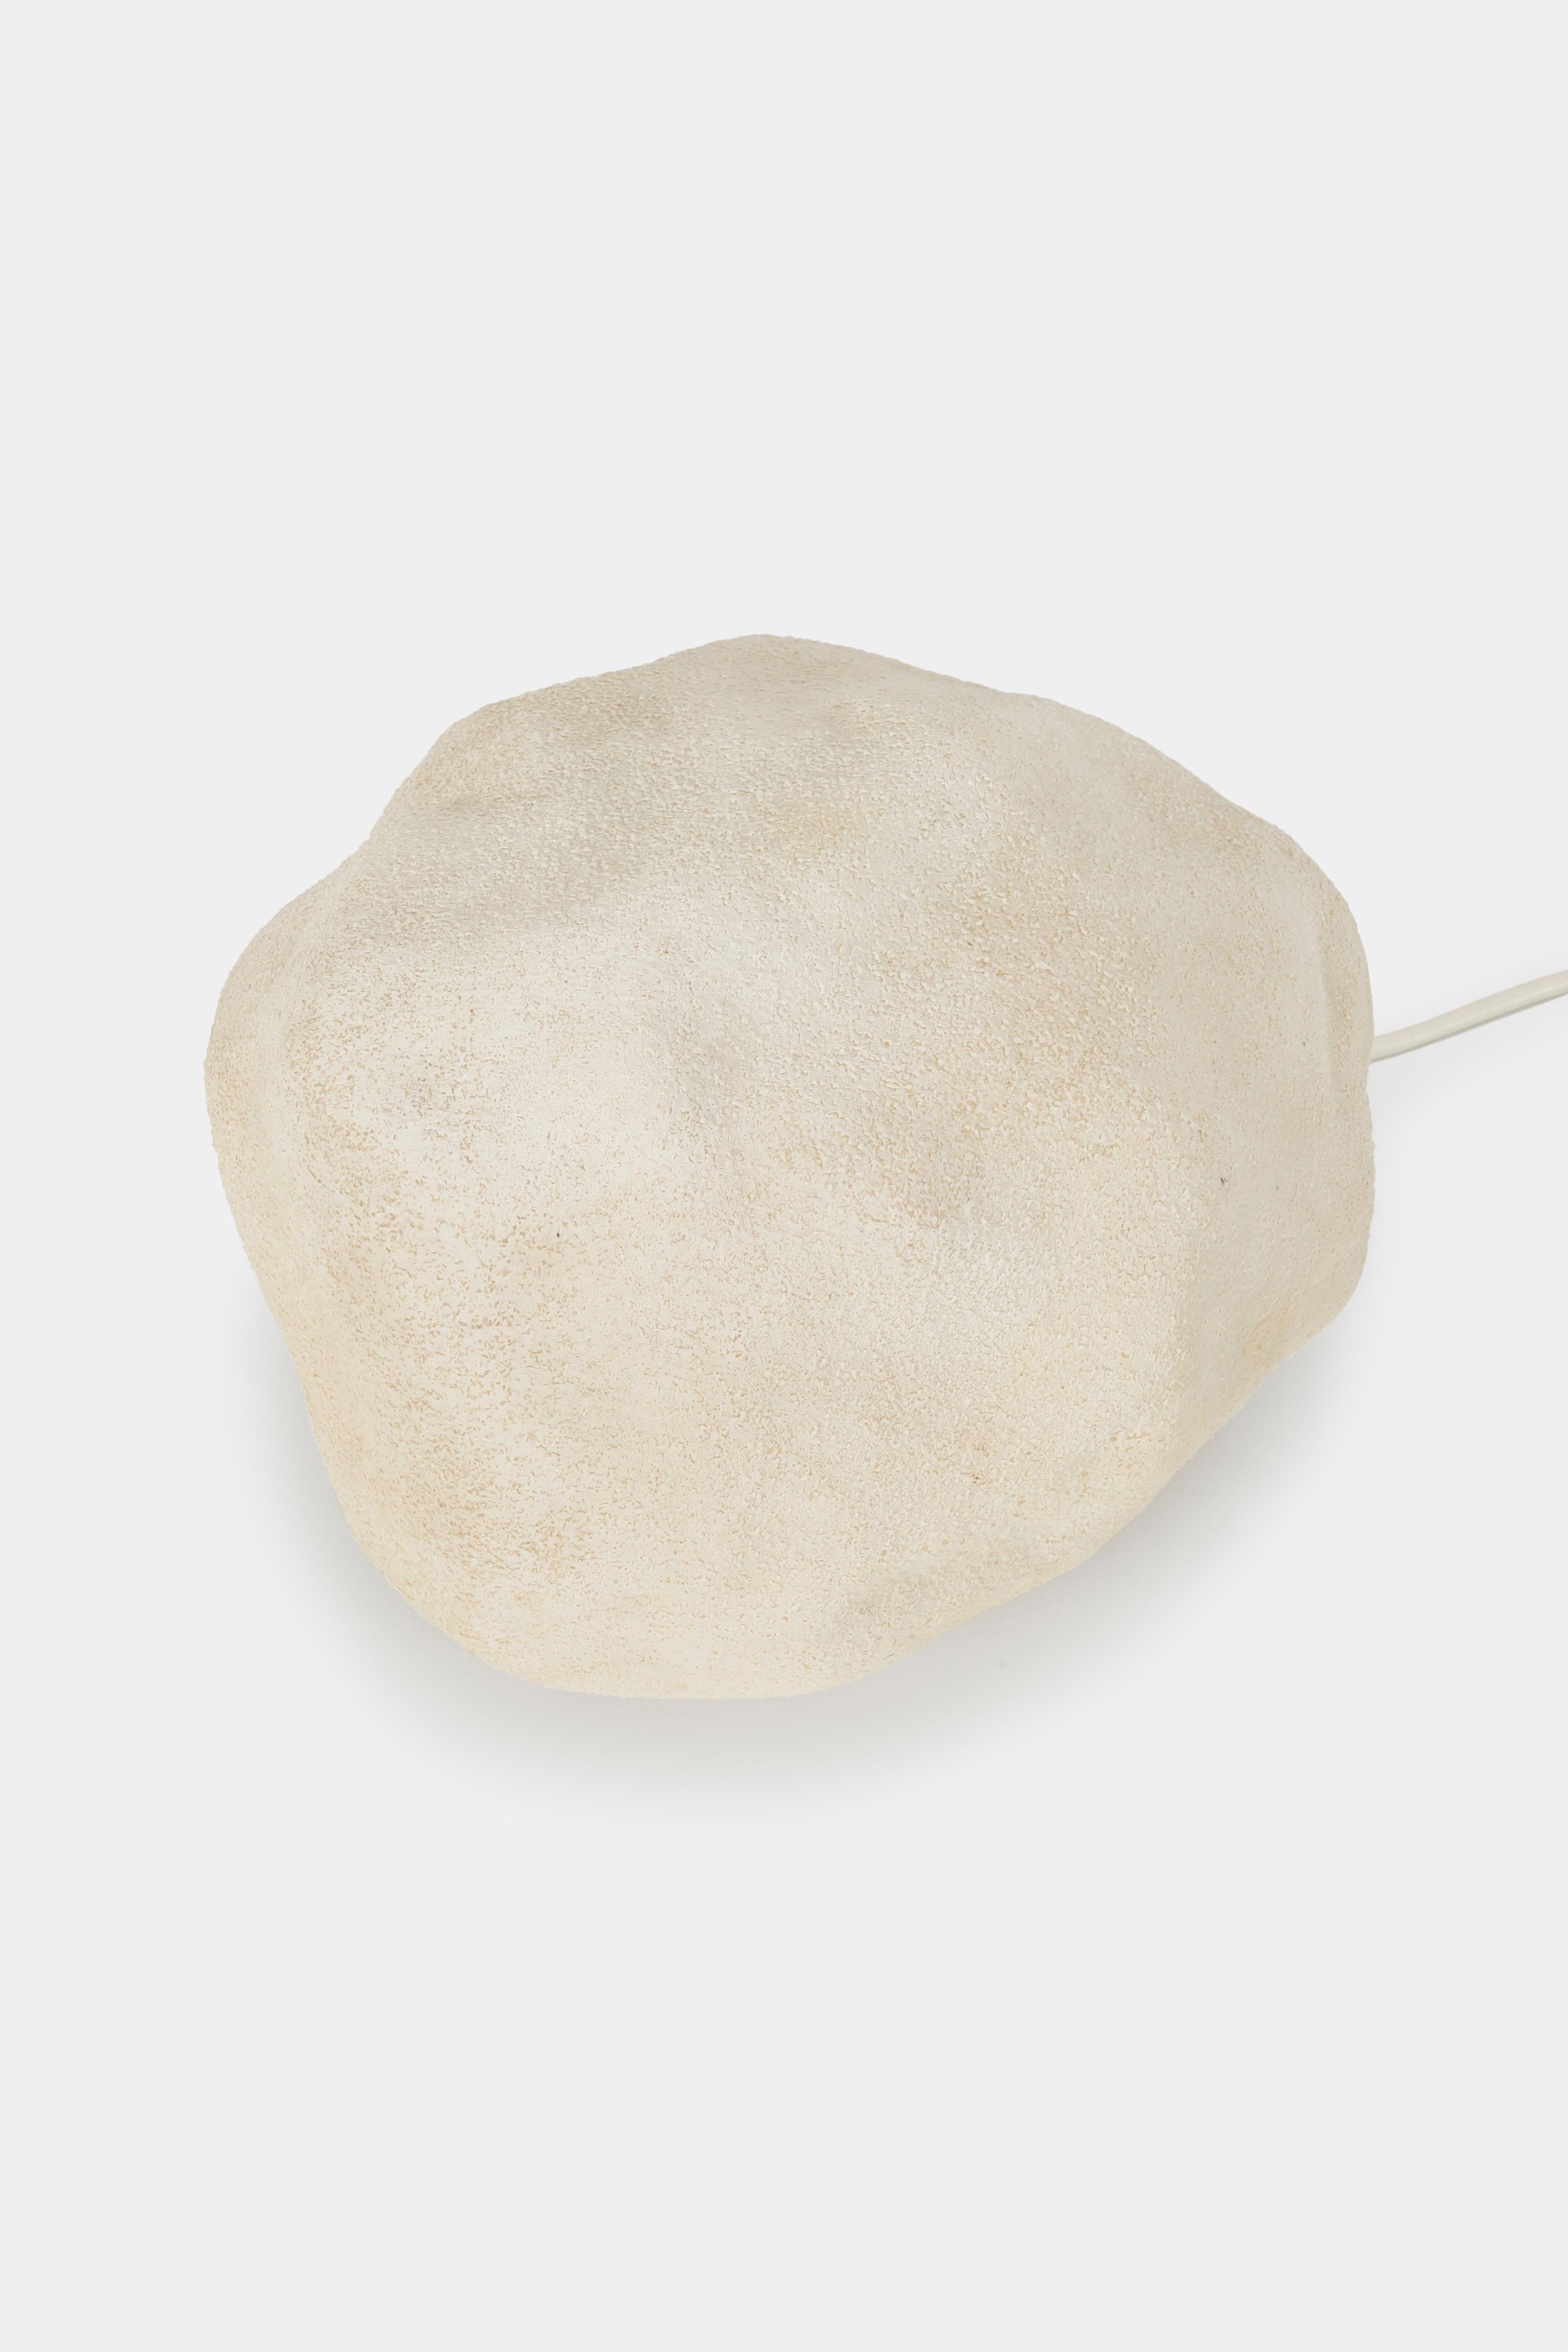 André Cazenave “Moon Rock Light” manufactured by Singleton in the 1970s in Italy. Translucent polyester with marble powder inclusions.